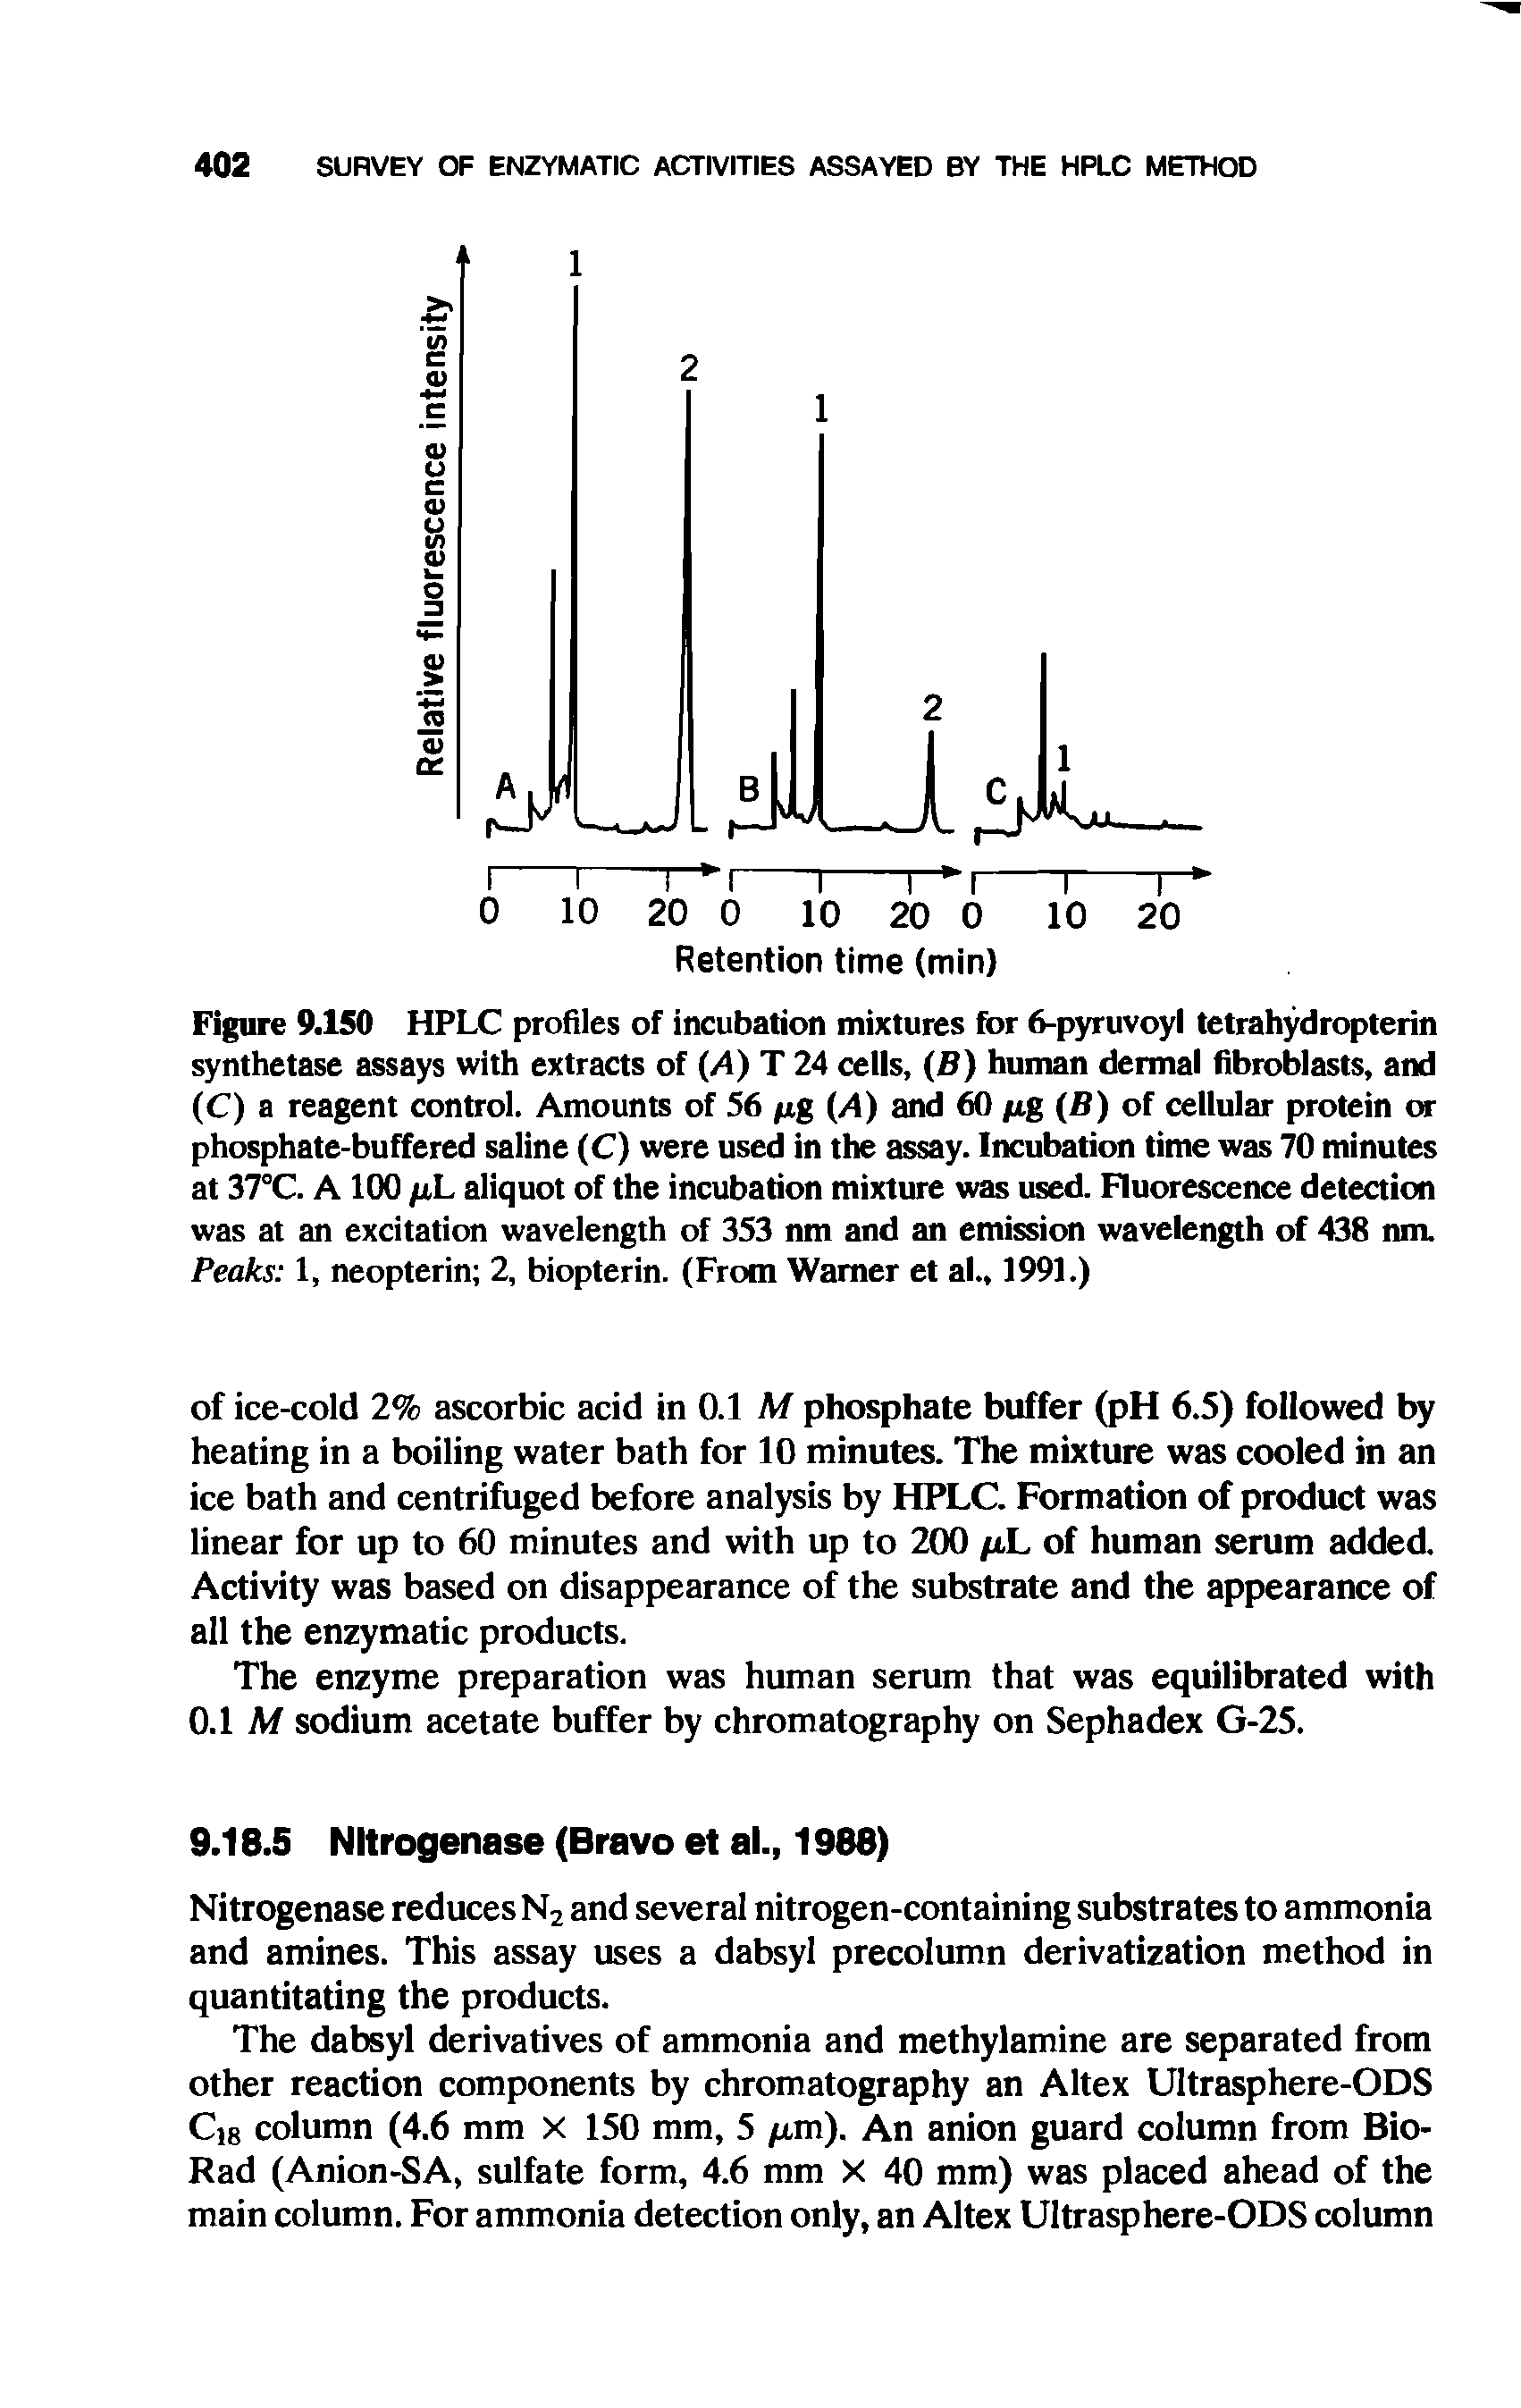 Figure 9.150 HPLC profiles of incubation mixtures for 6-pyruvoyl tetrahydropterin synthetase assays with extracts of (A) T 24 cells, (B) human dermal fibroblasts, and (C) a reagent control. Amounts of 56 fig (A) and 60 fig (B) of cellular protein or phosphate-buffered saline (C) were used in the assay. Incubation time was 70 minutes at 37°C. A 100 fiL aliquot of the incubation mixture was used. Fluorescence detection was at an excitation wavelength of 353 nm and an emission wavelength of 438 nm. Peaks 1, neopterin 2, biopterin. (From Warner et al., 1991.)...